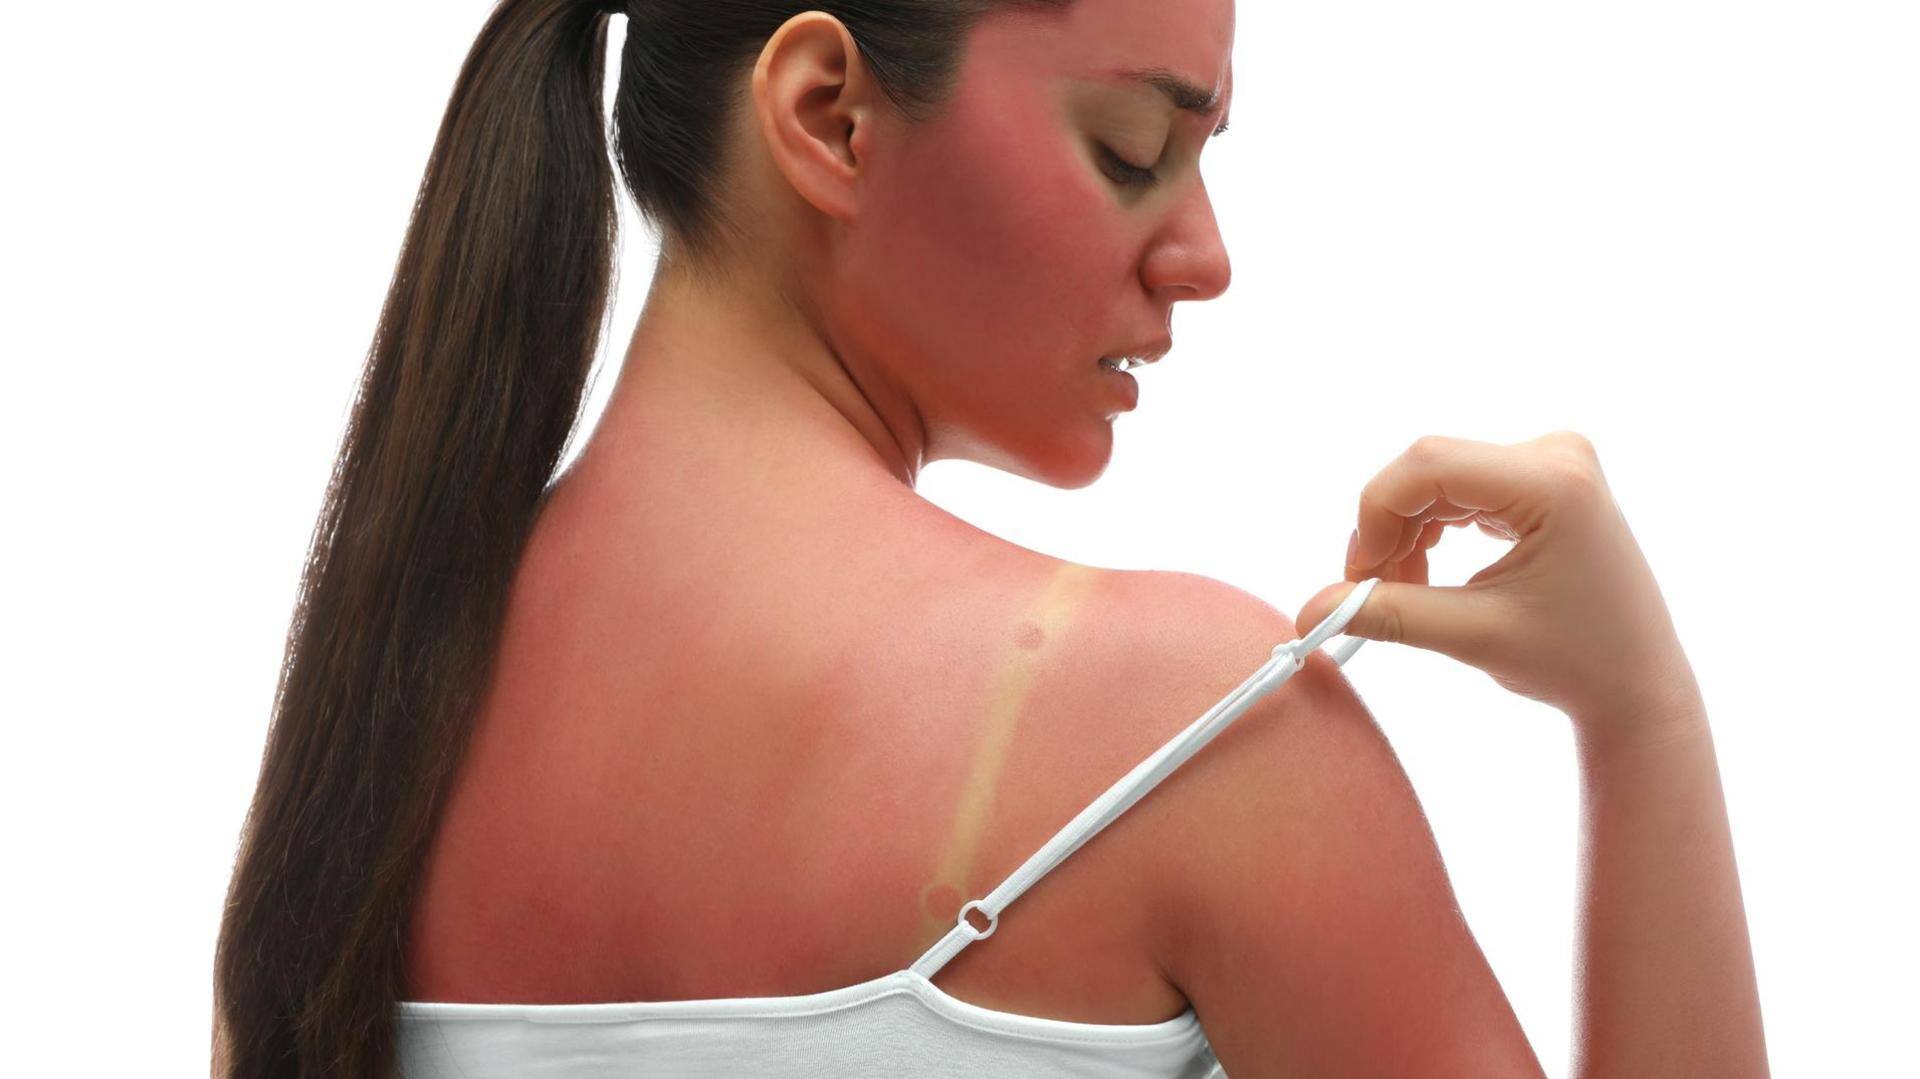 Got a sunburn? These effective natural home remedies can help